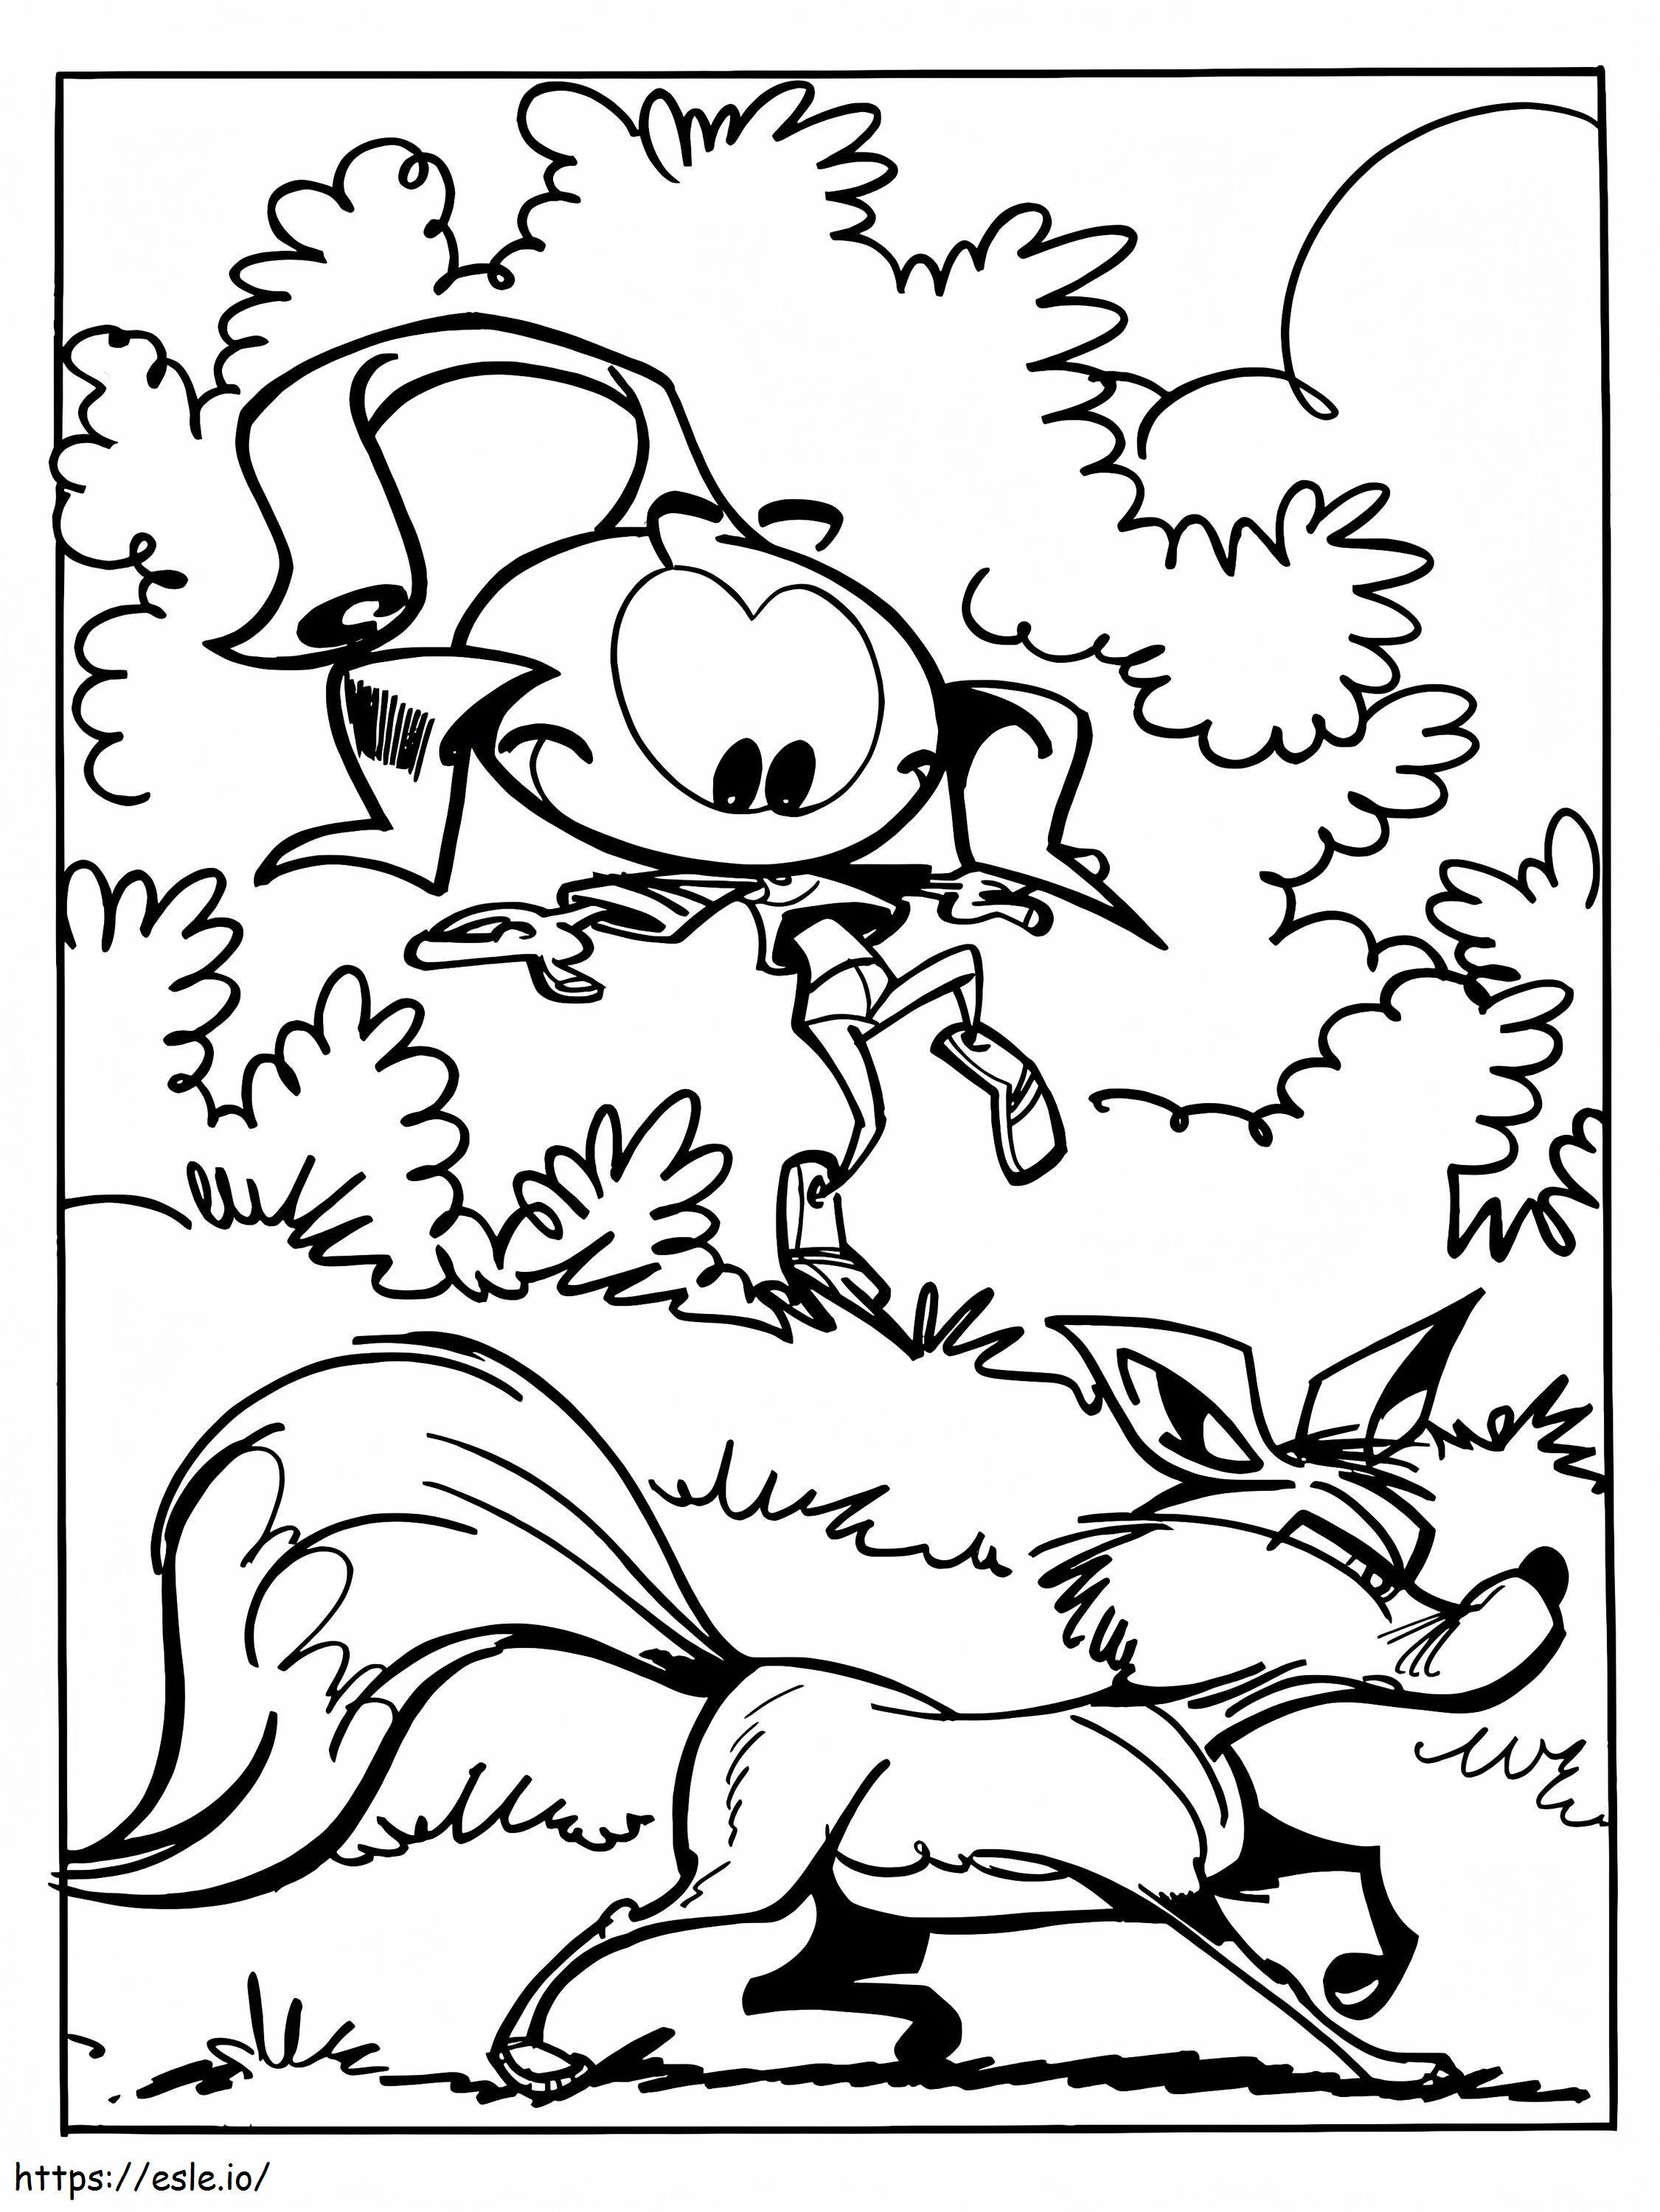 Snorks 12 coloring page